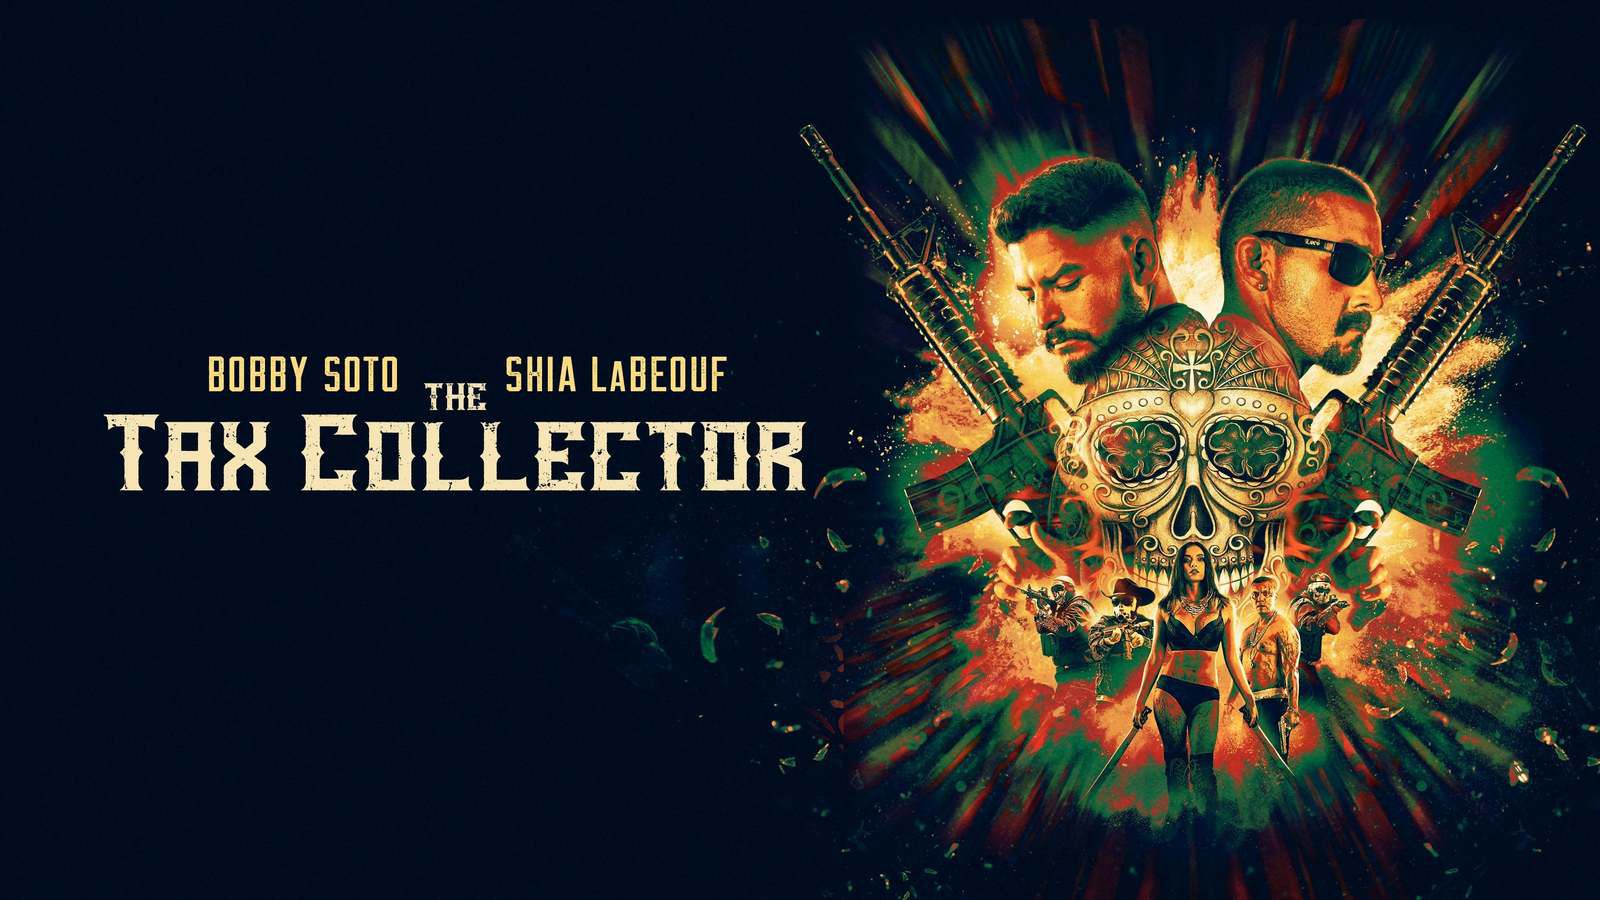 The Collector Full Movie Watch Online